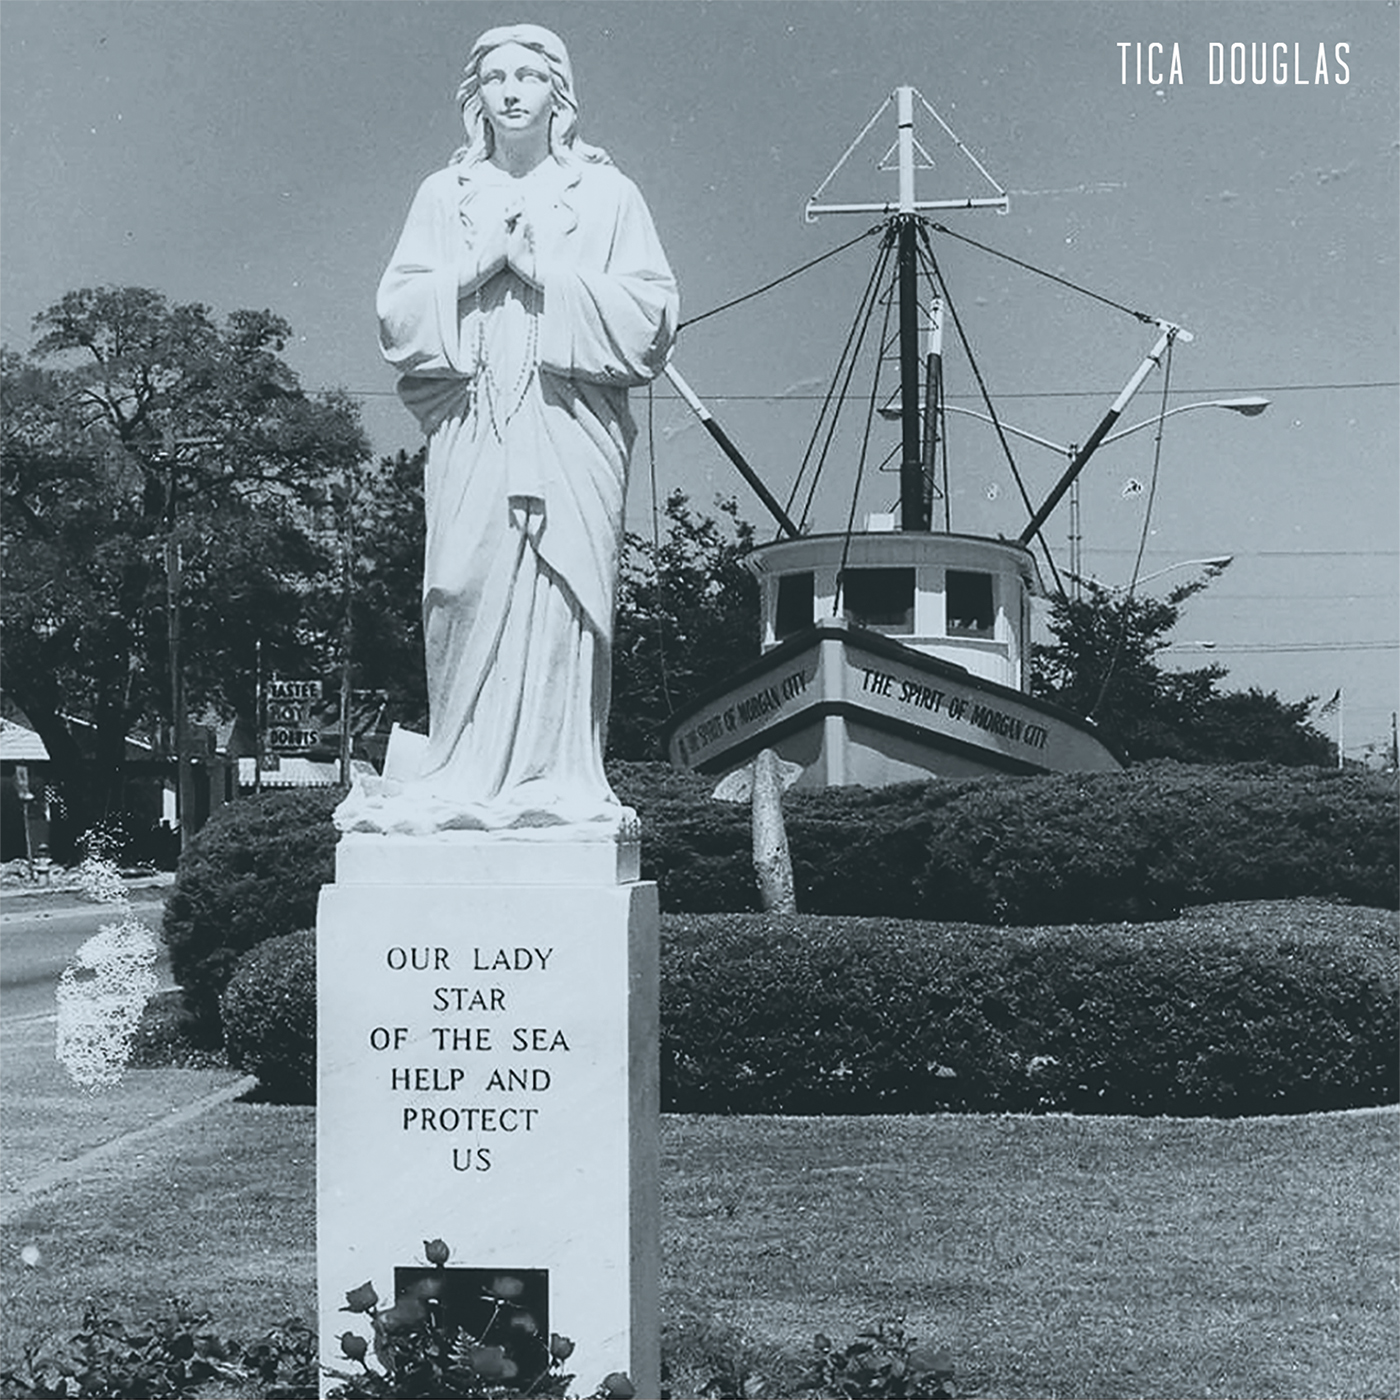 Tica Douglas Our Lady Star of the Sea, Help and Protect Us